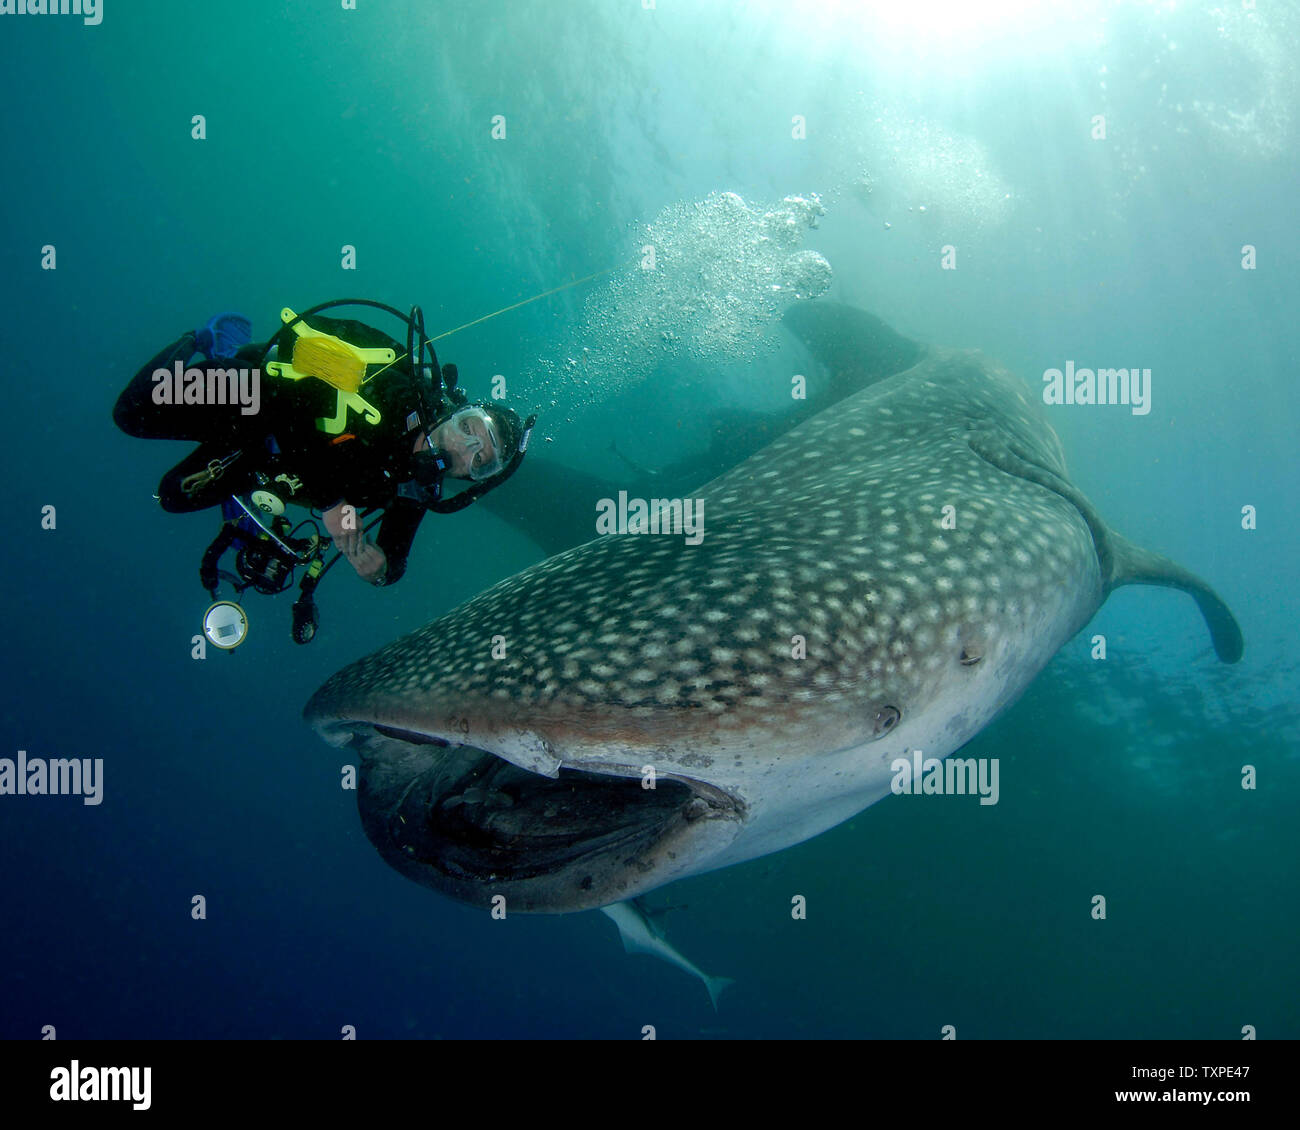 SCUBA Instructor Terri Coburn inspects the carcass of a whale shark which was found approximately one mile offshore from Pompano Beach, Florida on June 10, 2006.The cause of death of the shark was not readily apparent. The whale shark is not indigenous to the waters off of South Florida and sighting them is quite rare. (UPI Photo/Joe Marino) Stock Photo